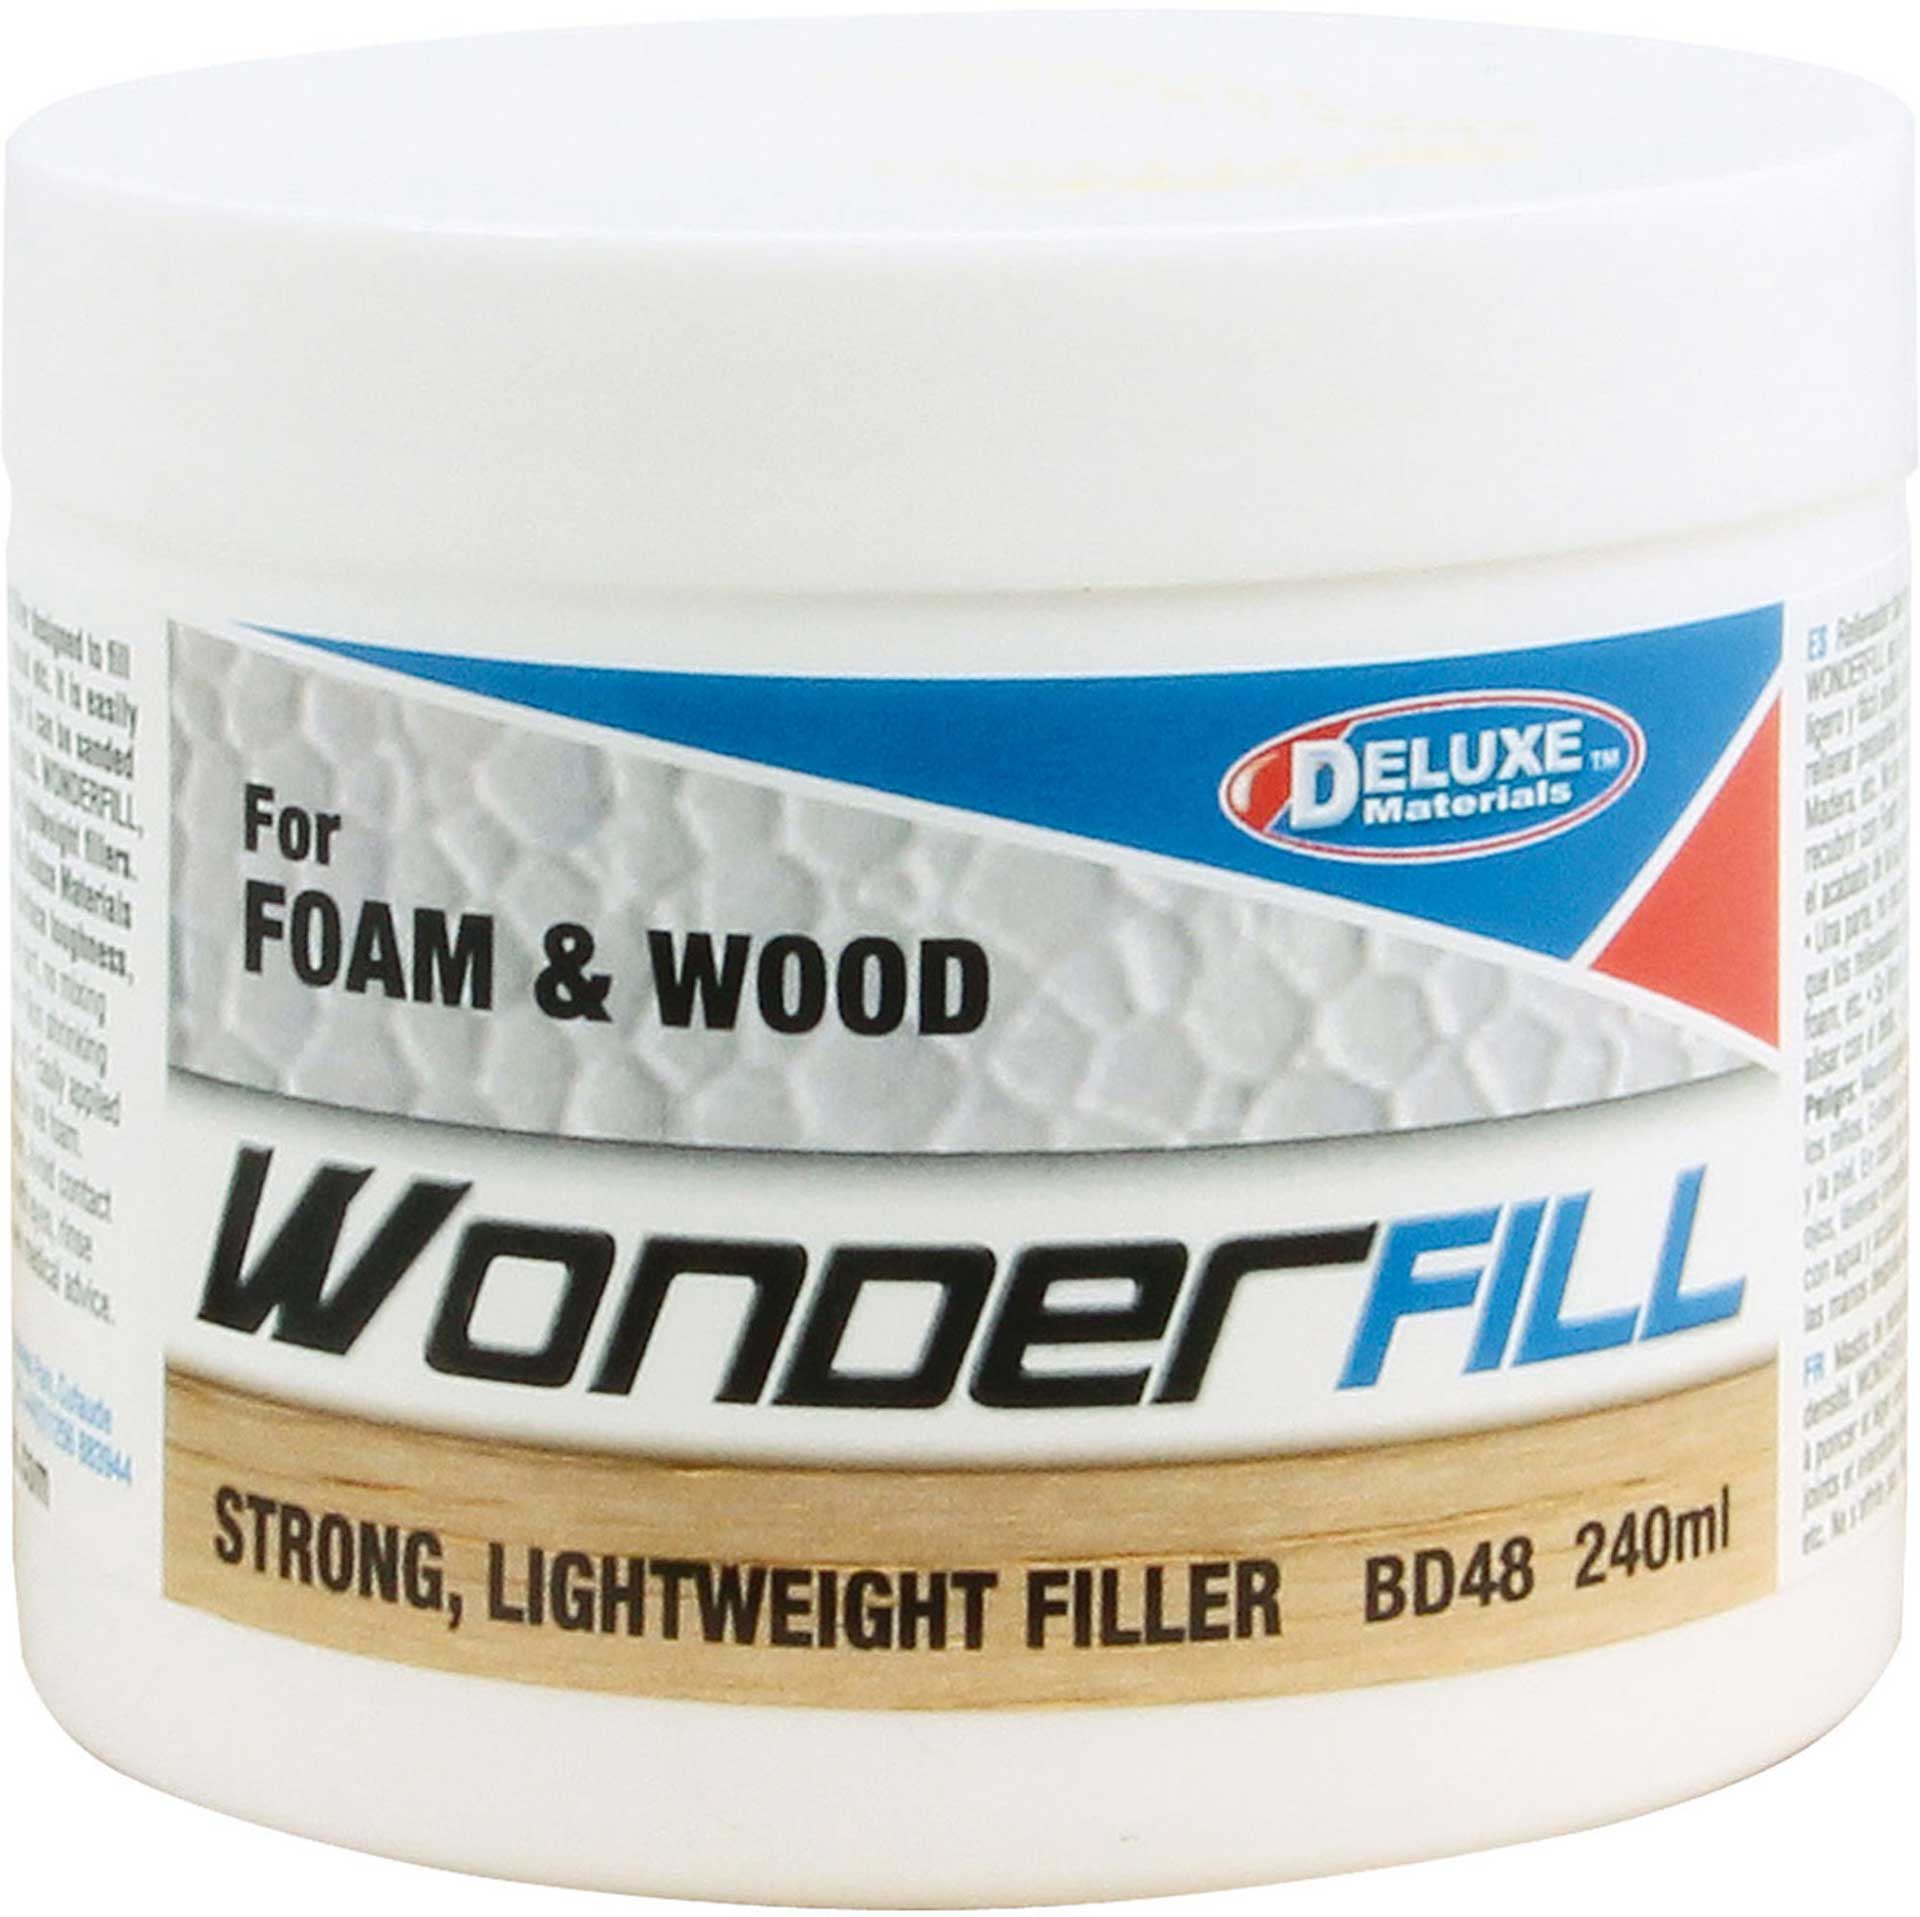 DELUXE WONDERFILL 240ML LIGHT SPATULA FOR FOAM AND WOOD